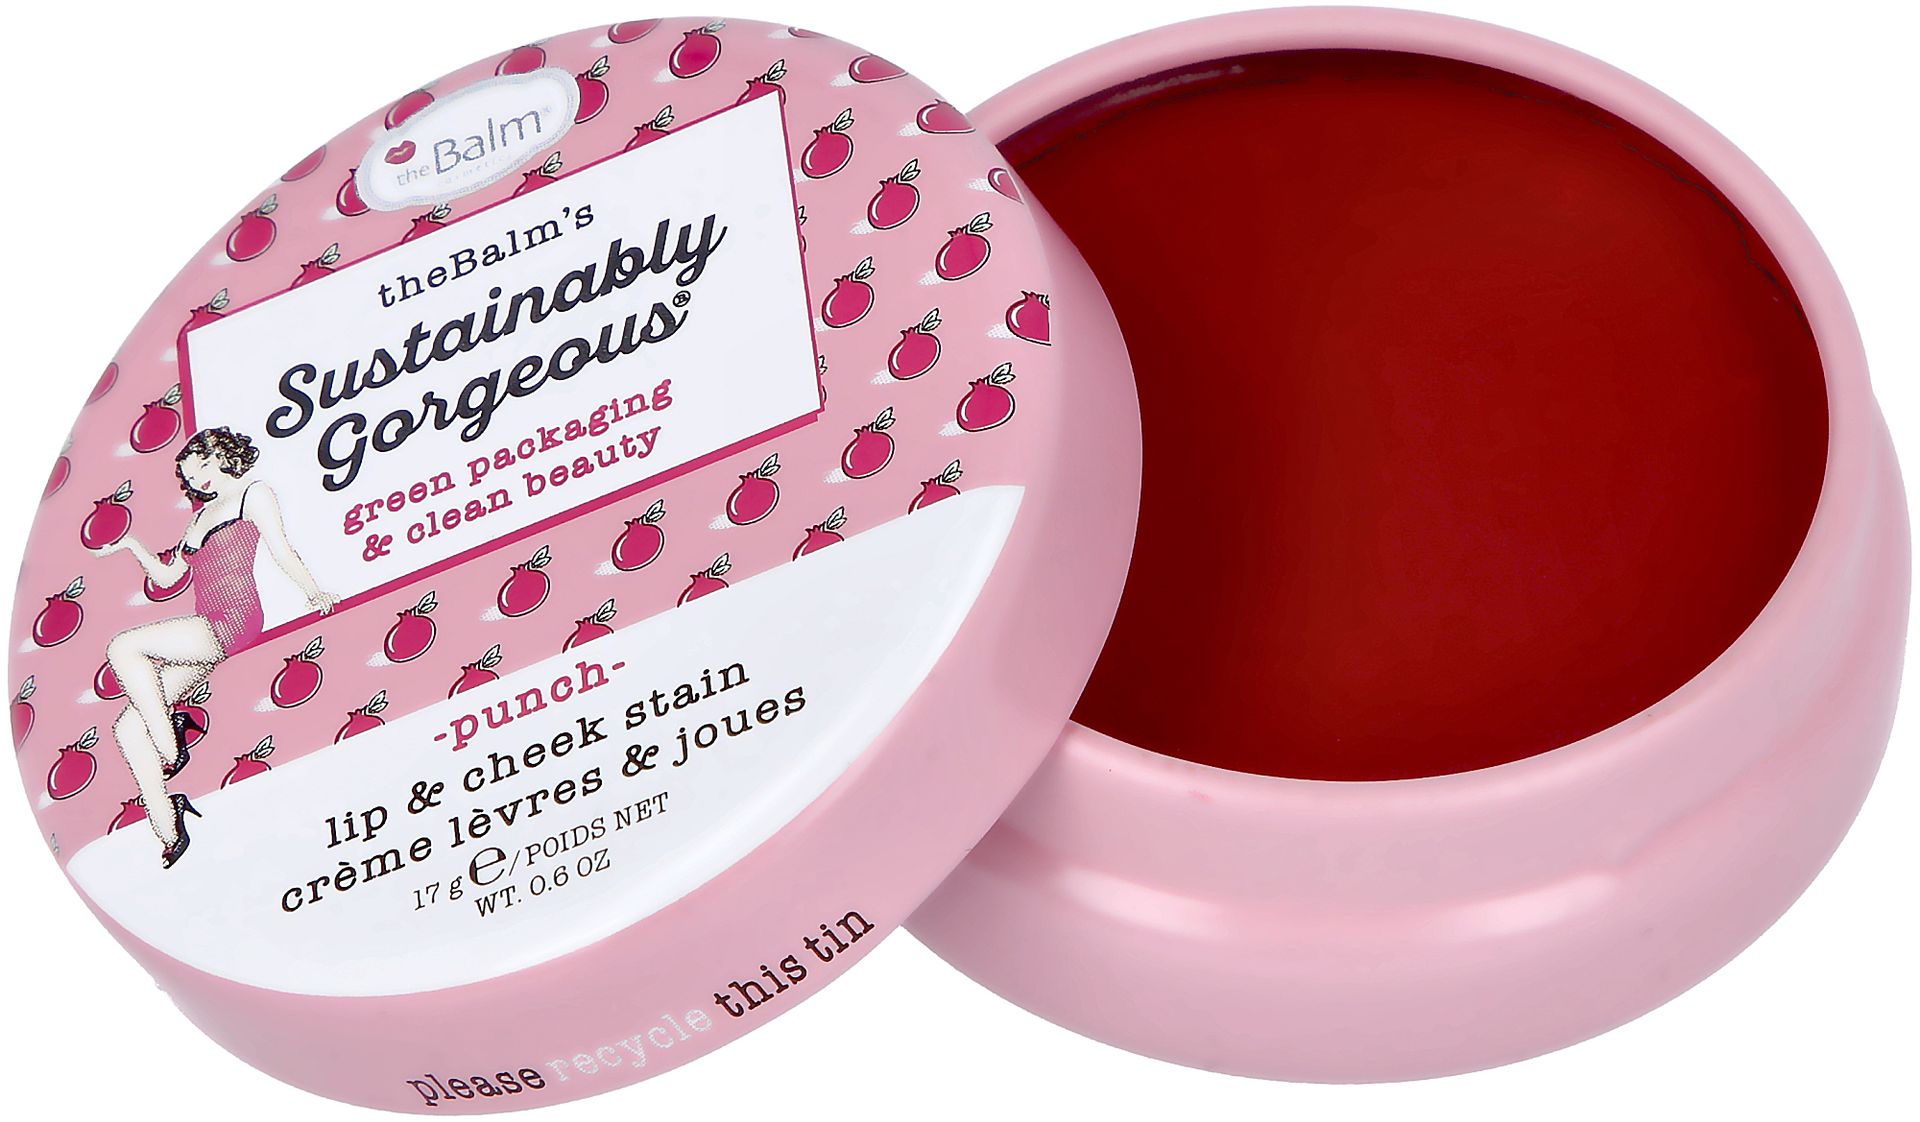 the Balm Sustainably Gorgeous Lip & Cheek Stain Punch